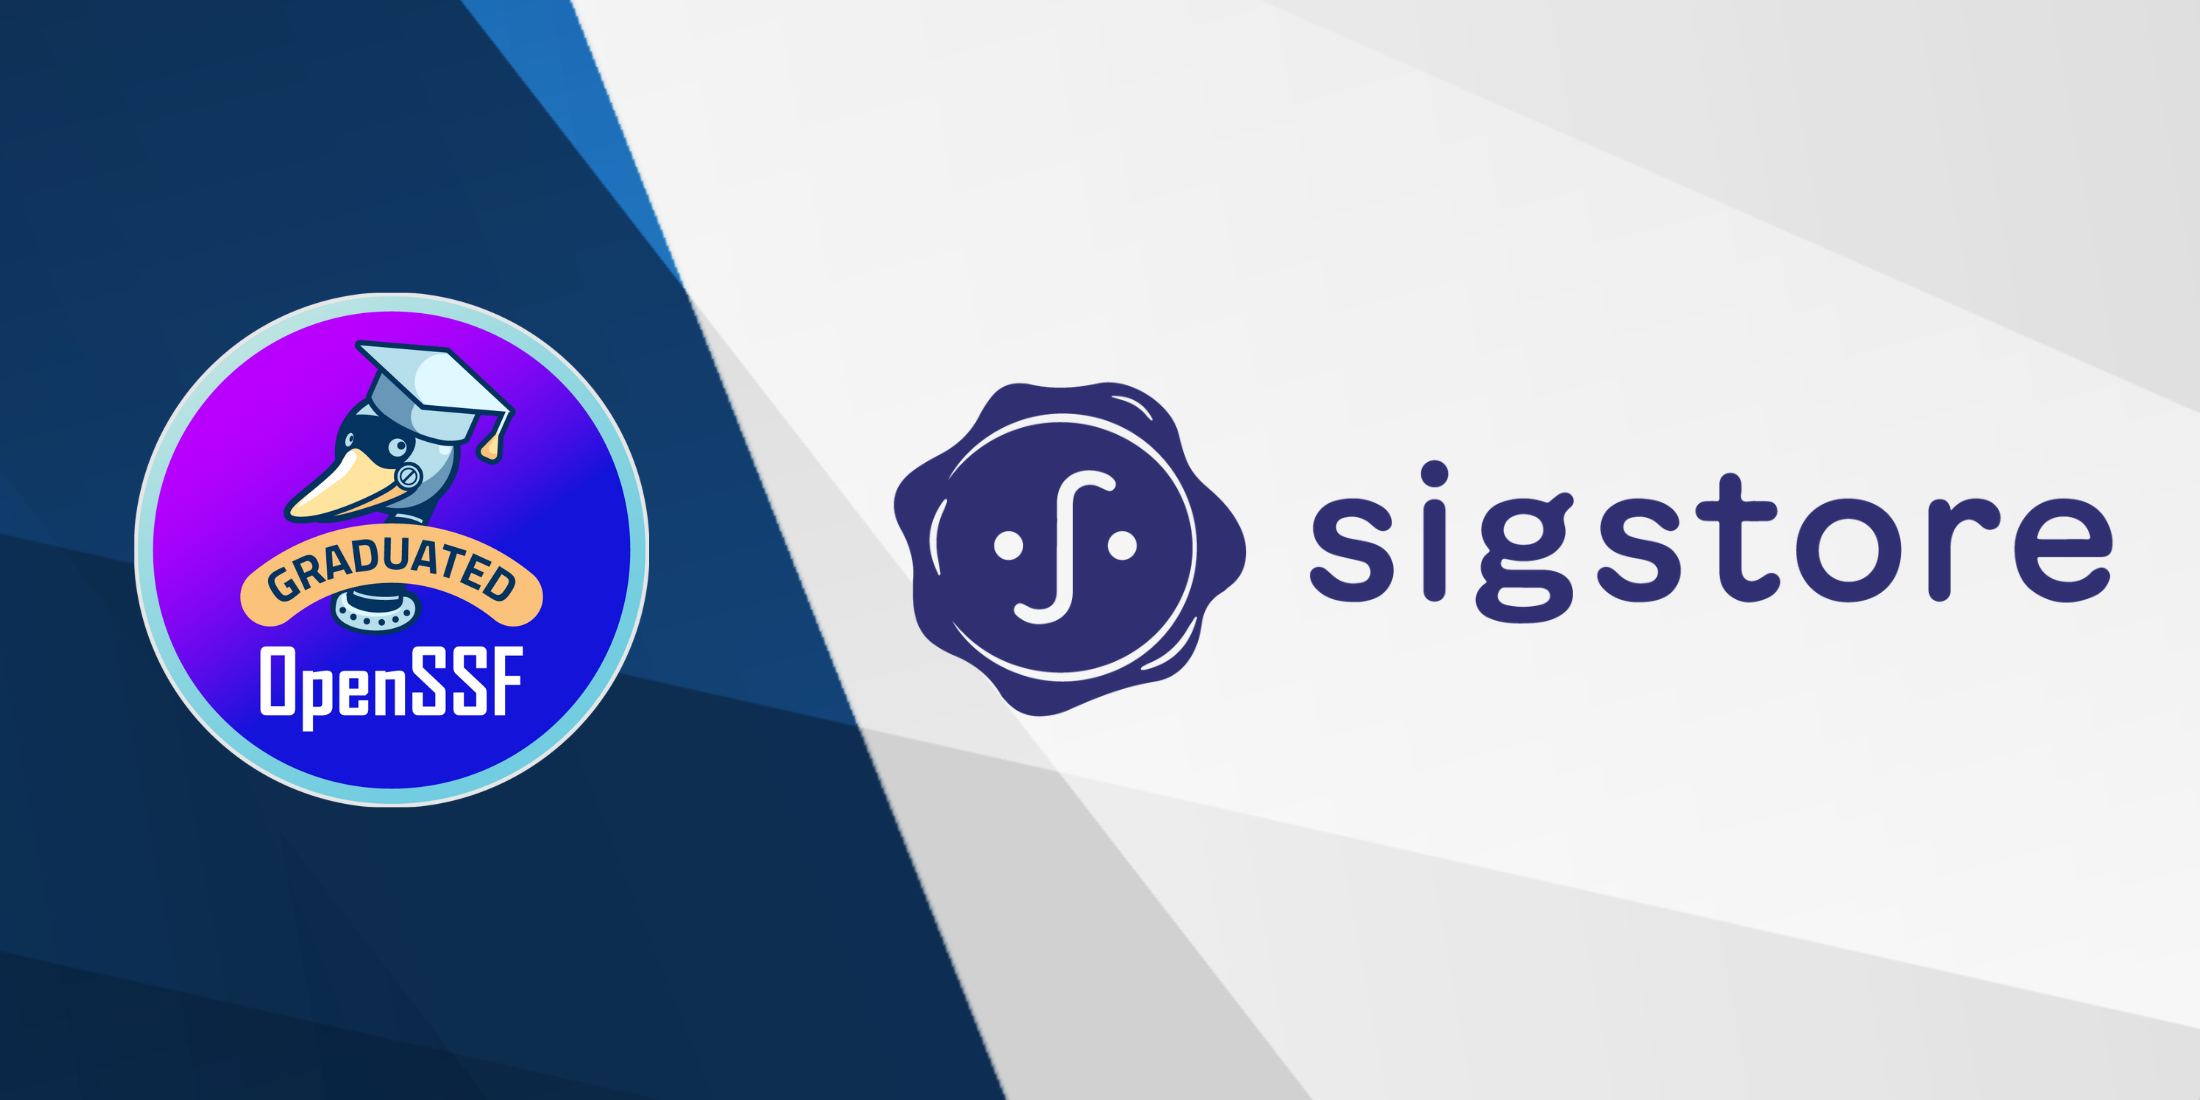 Sigstore OpenSSF Graduated Project